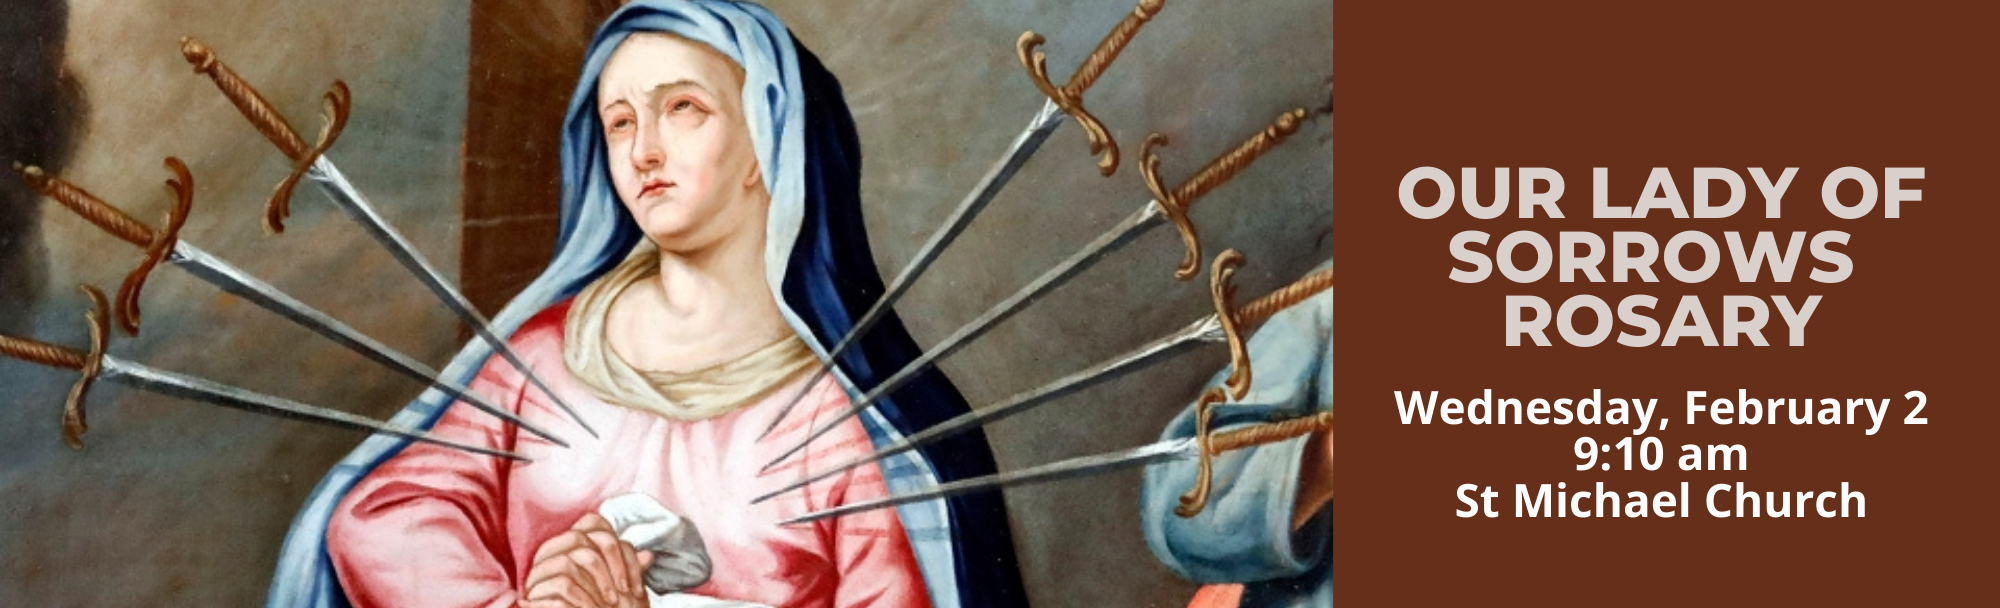 Our Lady Of Sorrows Rosary